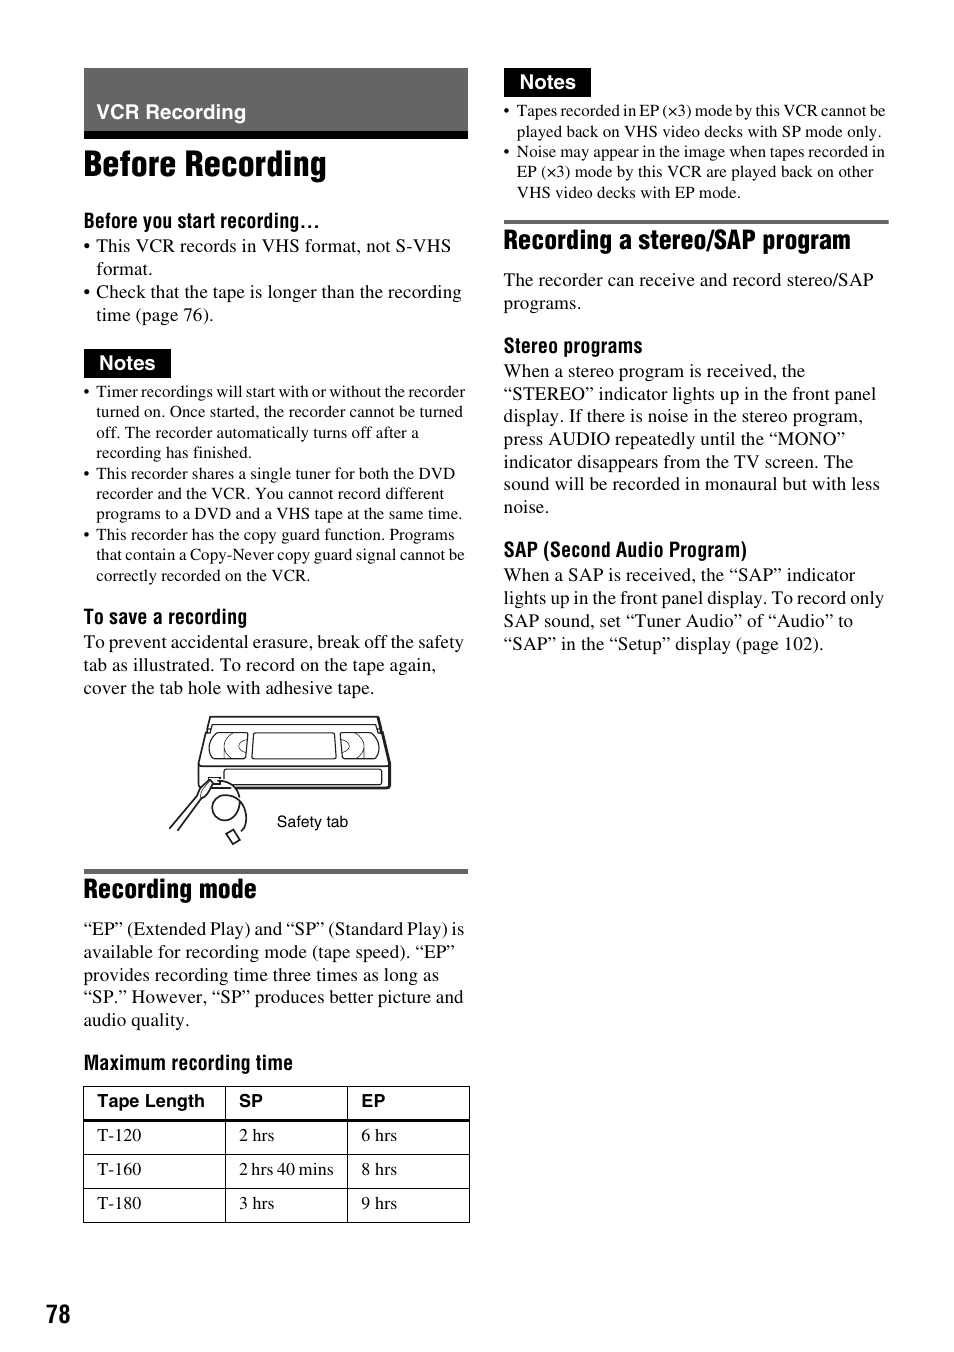 Vcr recording, Before recording, Recording mode | Recording a stereo/sap program | Sony RDR-VX521 User Manual | Page 78 / 132